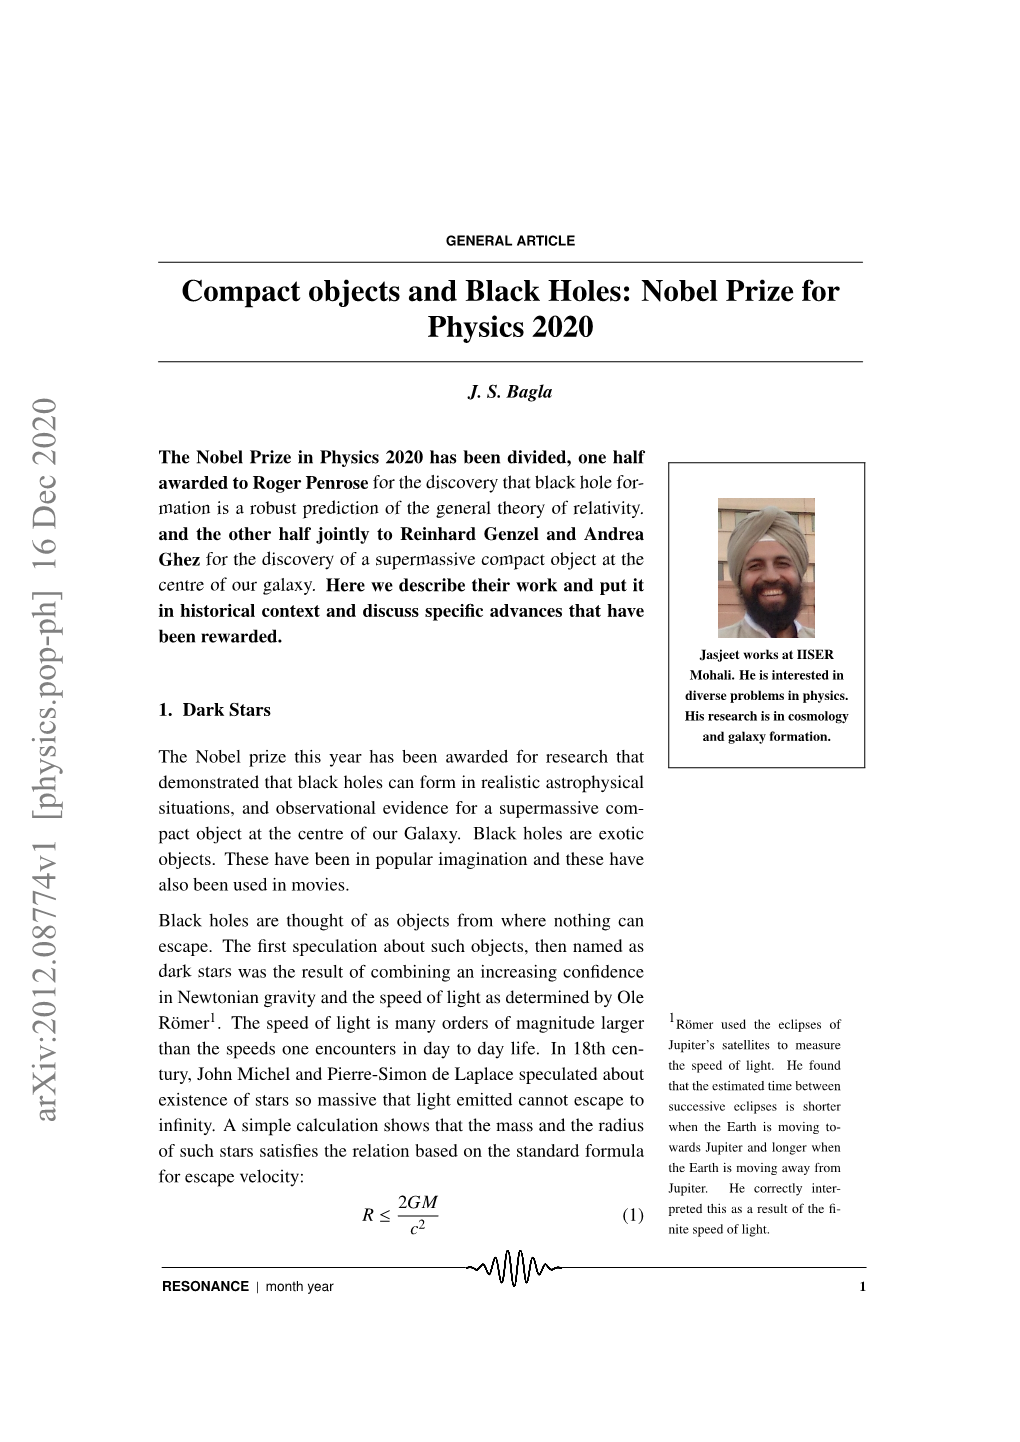 Compact Objects and Black Holes: Nobel Prize for Physics 2020